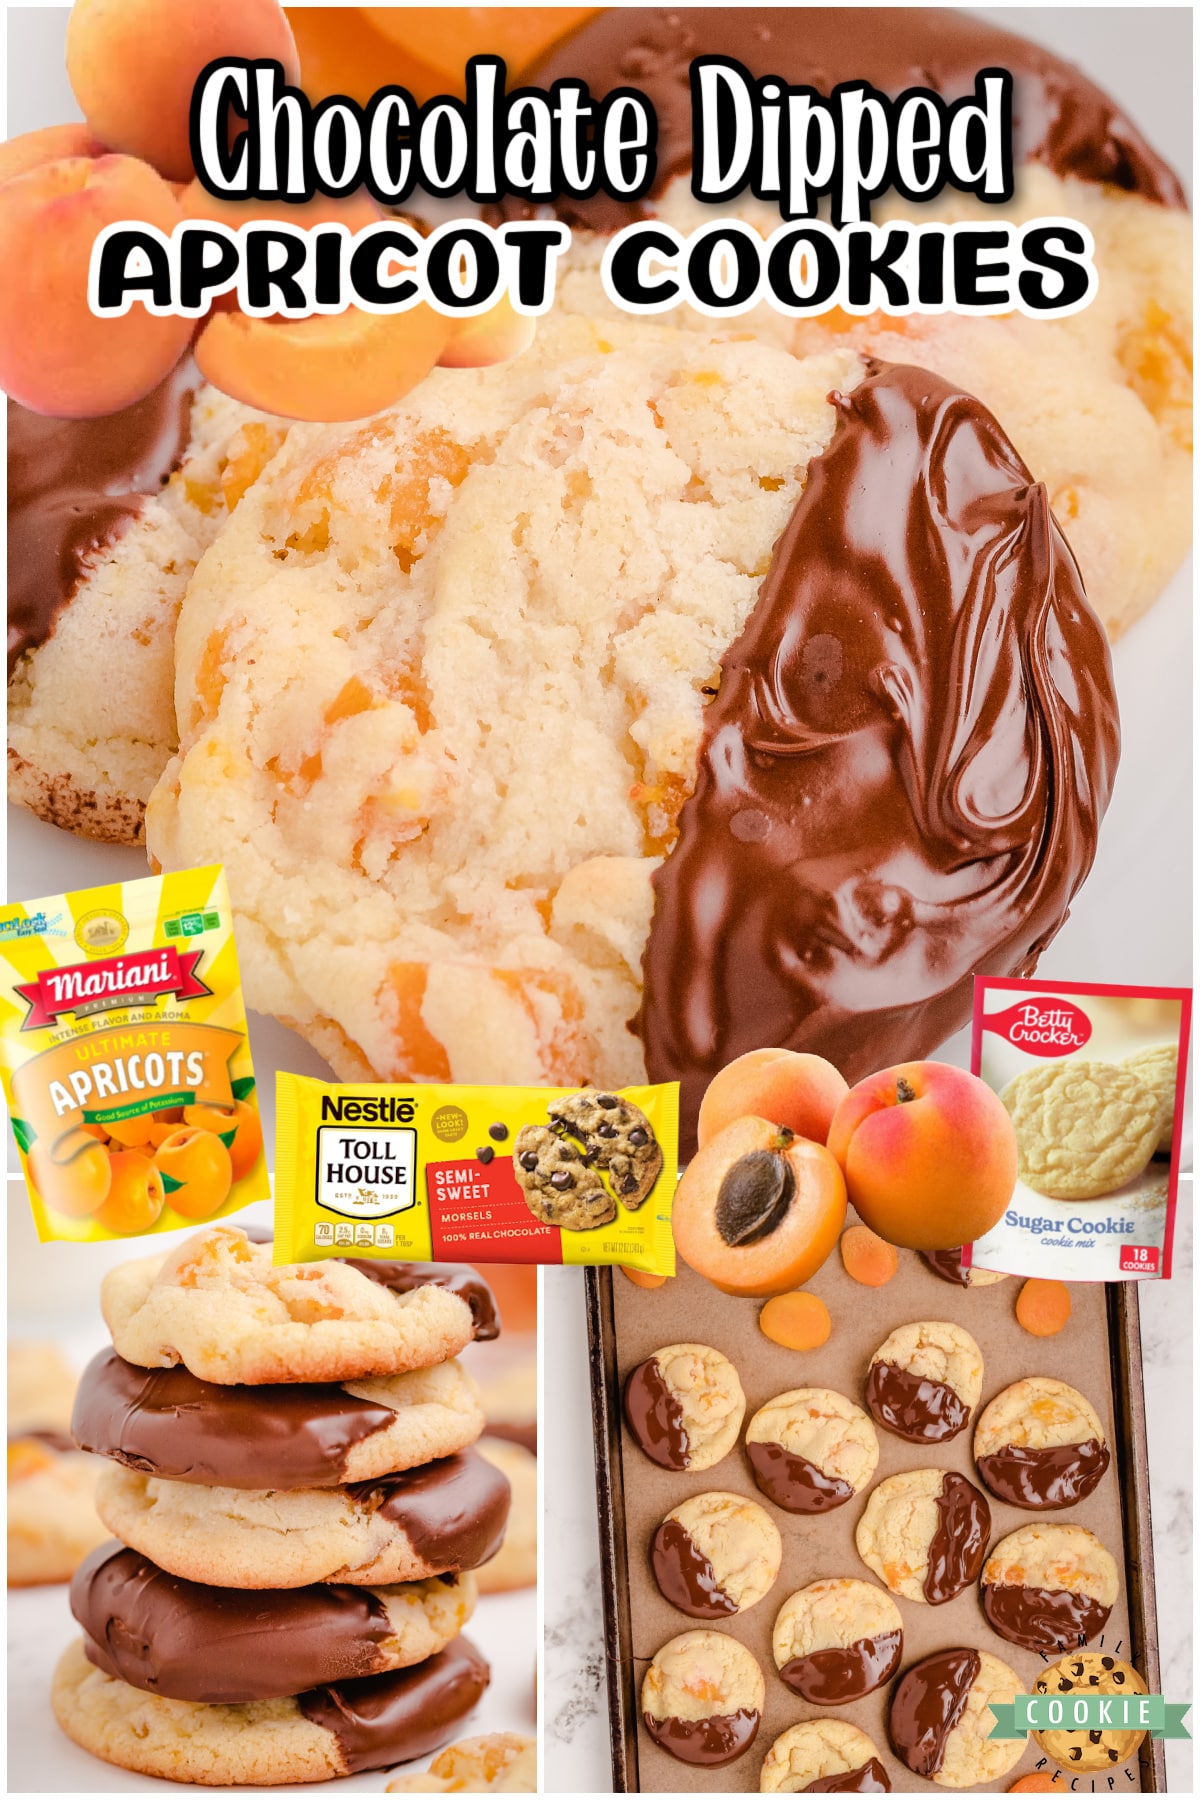 Easy Apricot Cookies perfectly combine a sweet cookie base with tangy fruit flavor. These apricot sugar cookies are dipped in dark chocolate & are simply delightful!